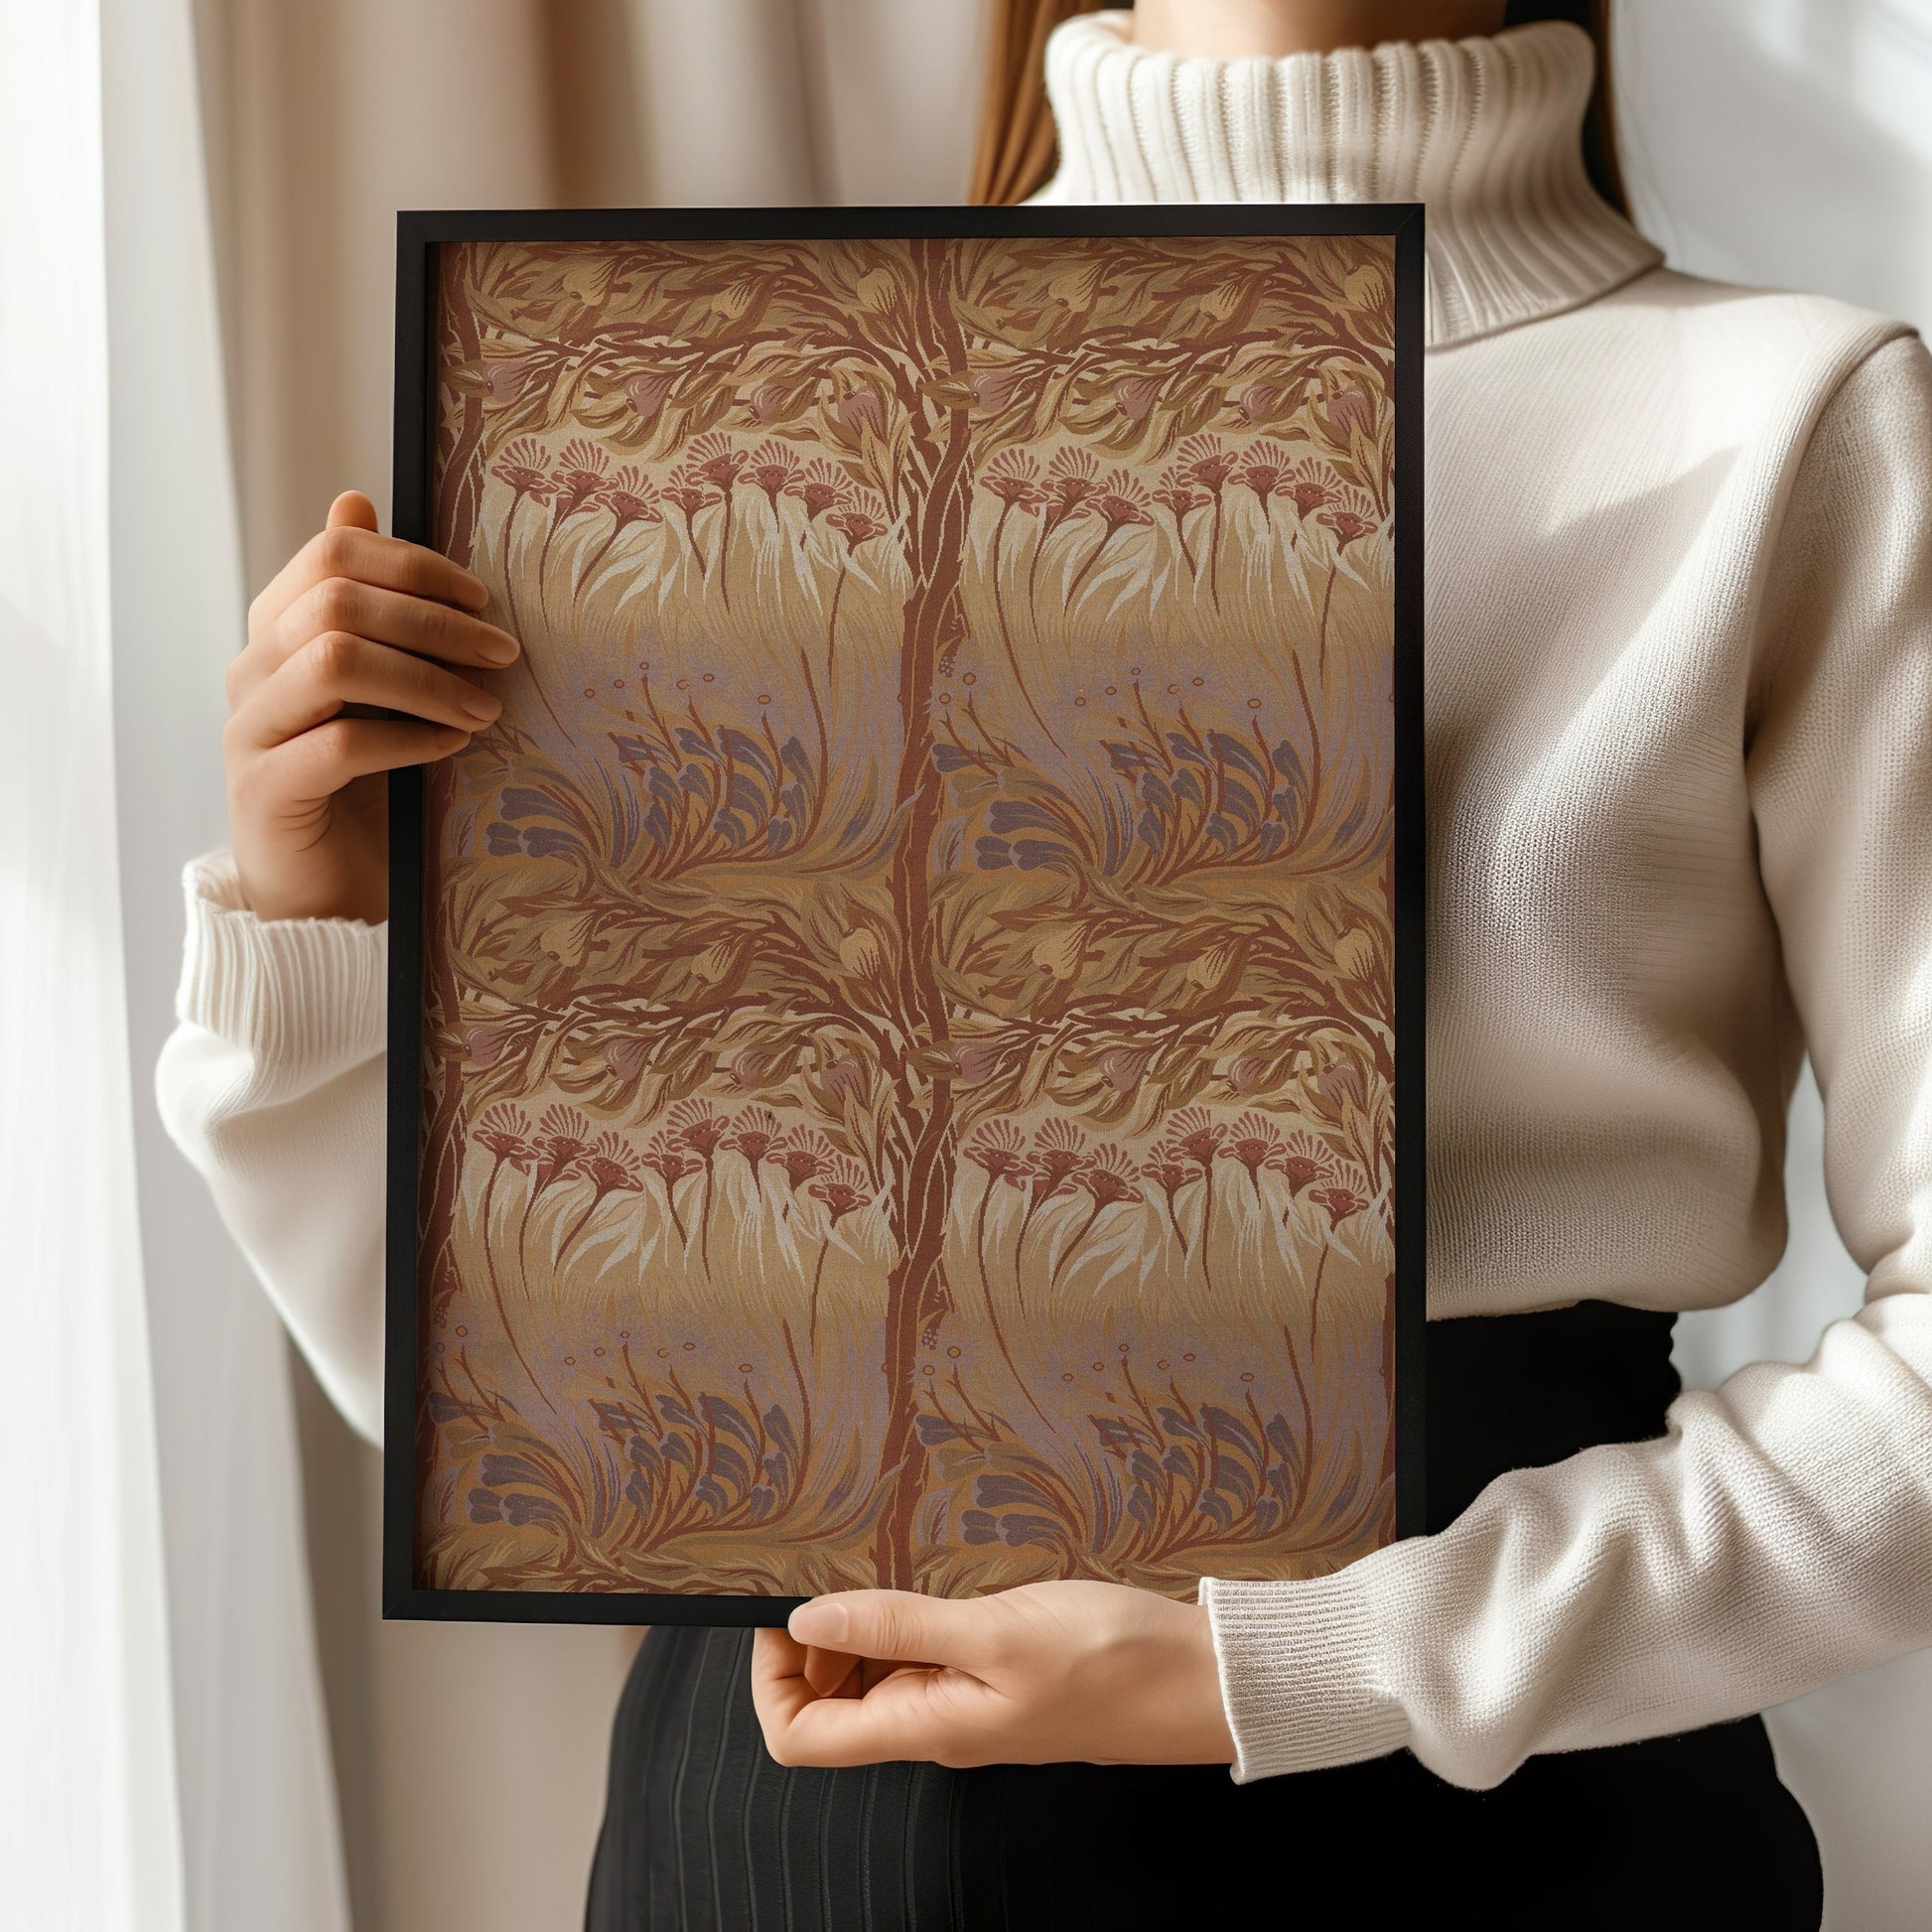 William Morris - The Fig Tree by Arthur Heygate Mackmurdo (woven wool) | Vintage Pattern Print in Brown (available framed or unframed)